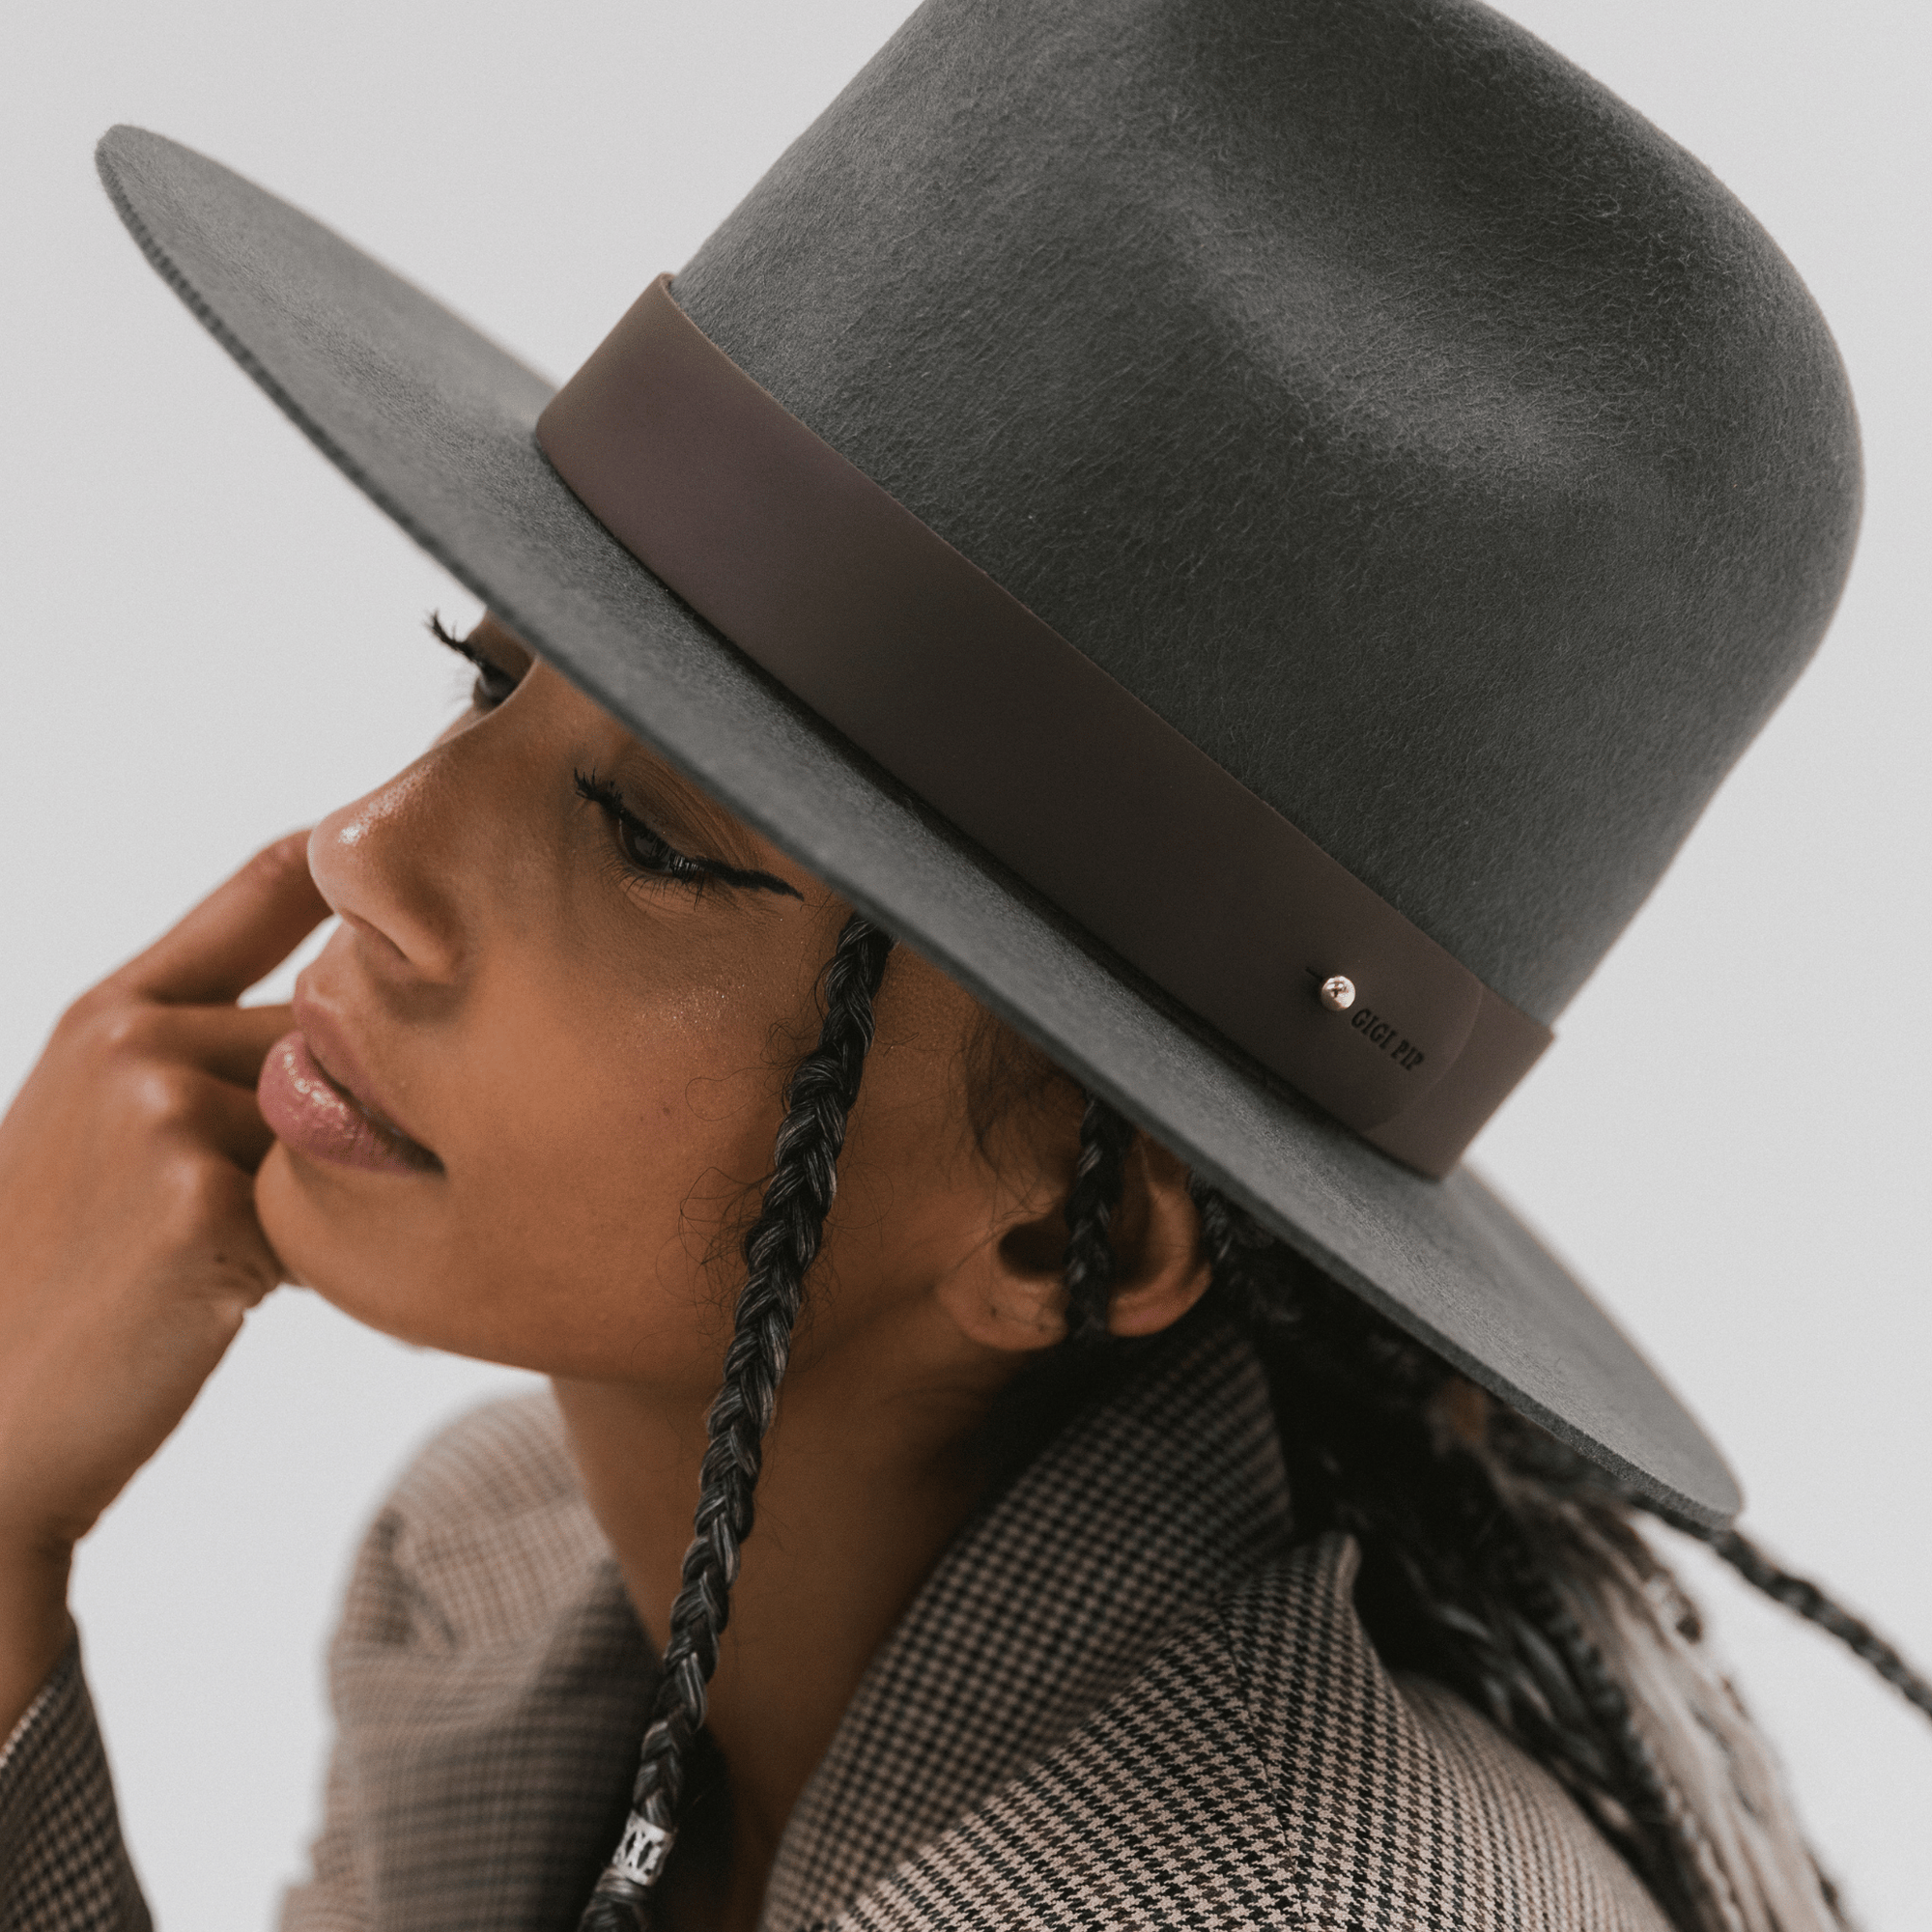 Gigi Pip hat bands + trims for women's hats - Wide Leather Band - 100% genuine leather hat band featuring a metal pin enclosure + Gigi Pip embossed on the edge [nude]